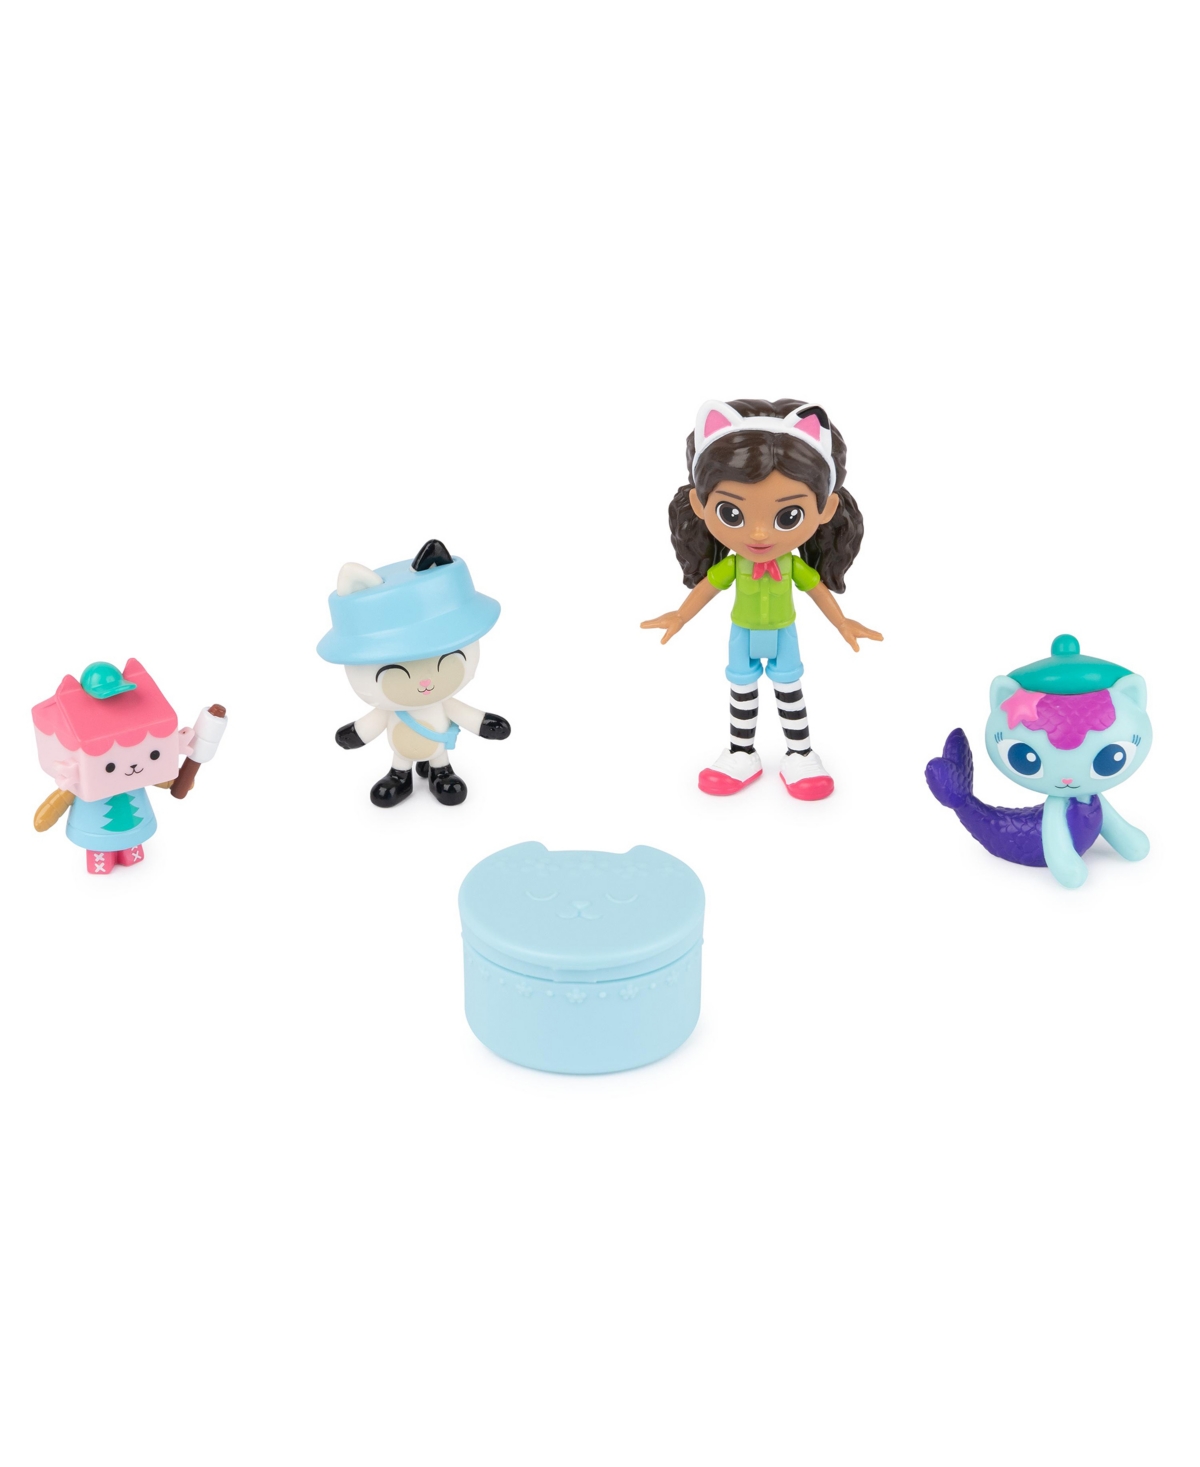 Gabby's Dollhouse Kids' Dreamworks, Campfire Gift Pack With Gabby Girl, Pandy Paws, Baby Box Mercat Toy Figures In Multi-color